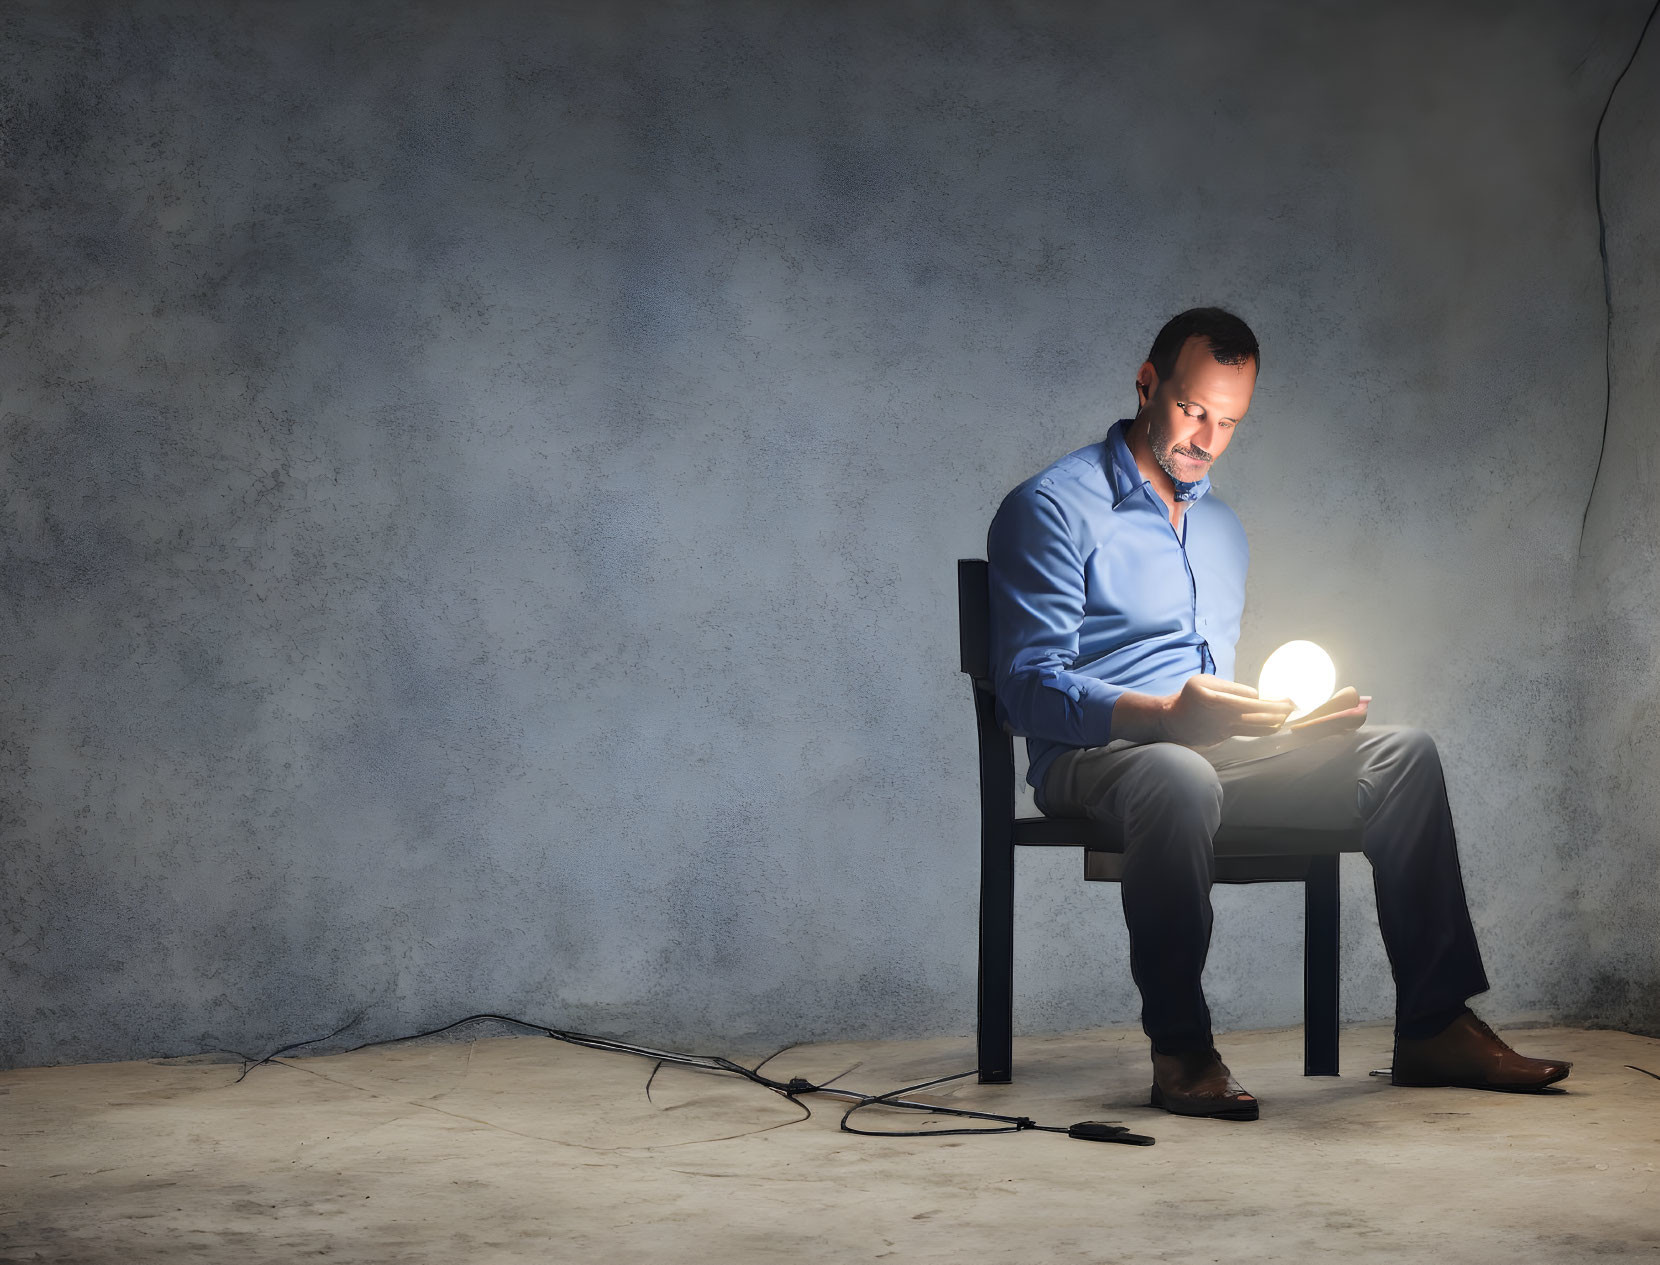 Man in blue shirt reading glowing book on dark chair against textured grey background